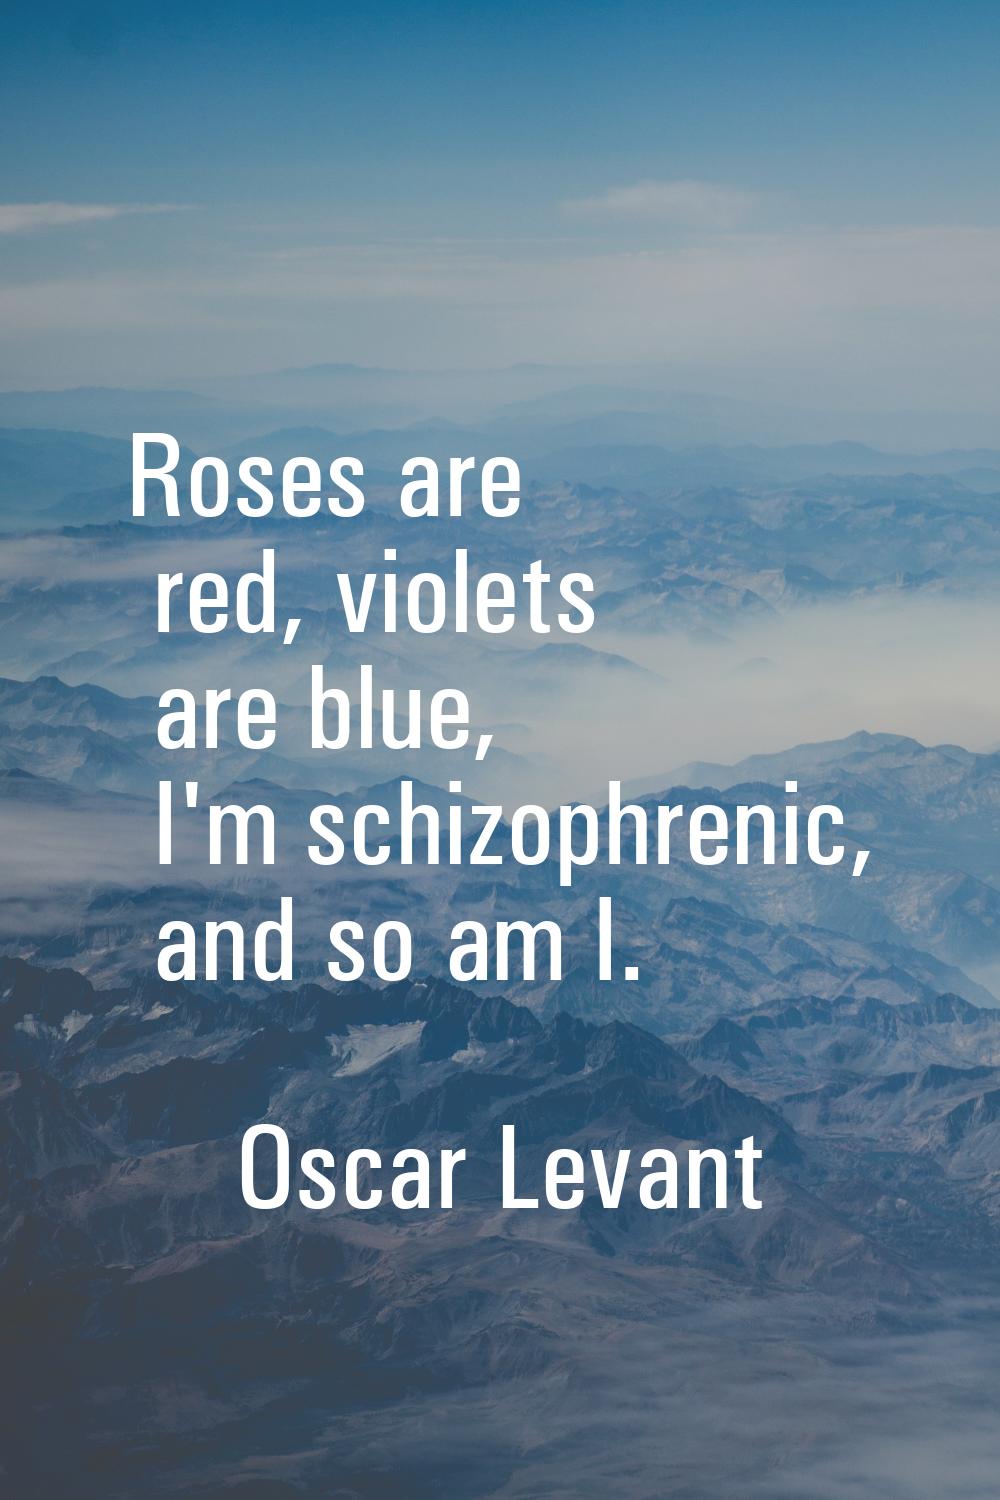 Roses are red, violets are blue, I'm schizophrenic, and so am I.